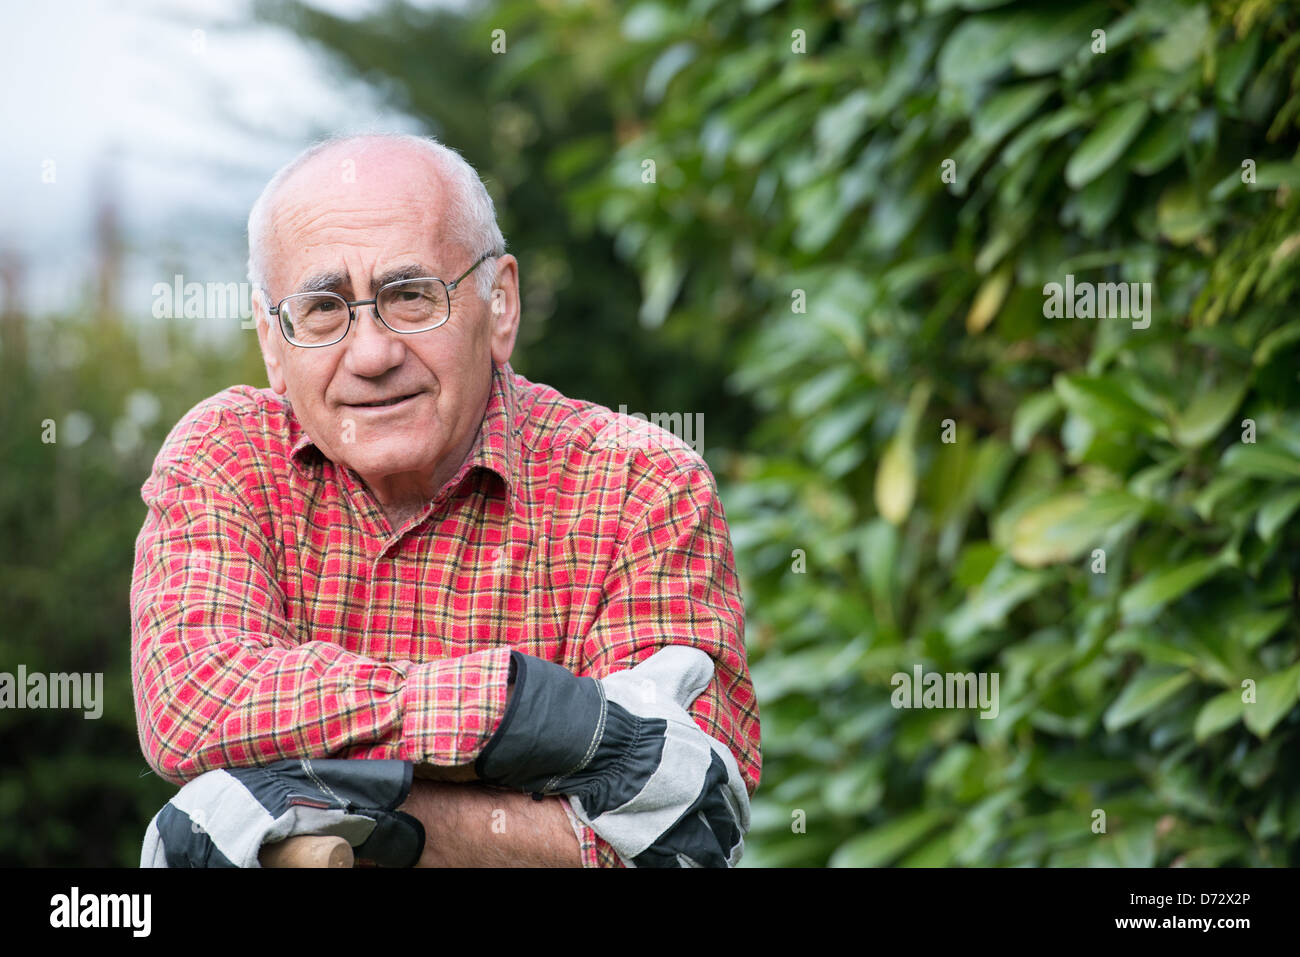 Elderly man standing in garden, wearing work clothes and holding spade Stock Photo